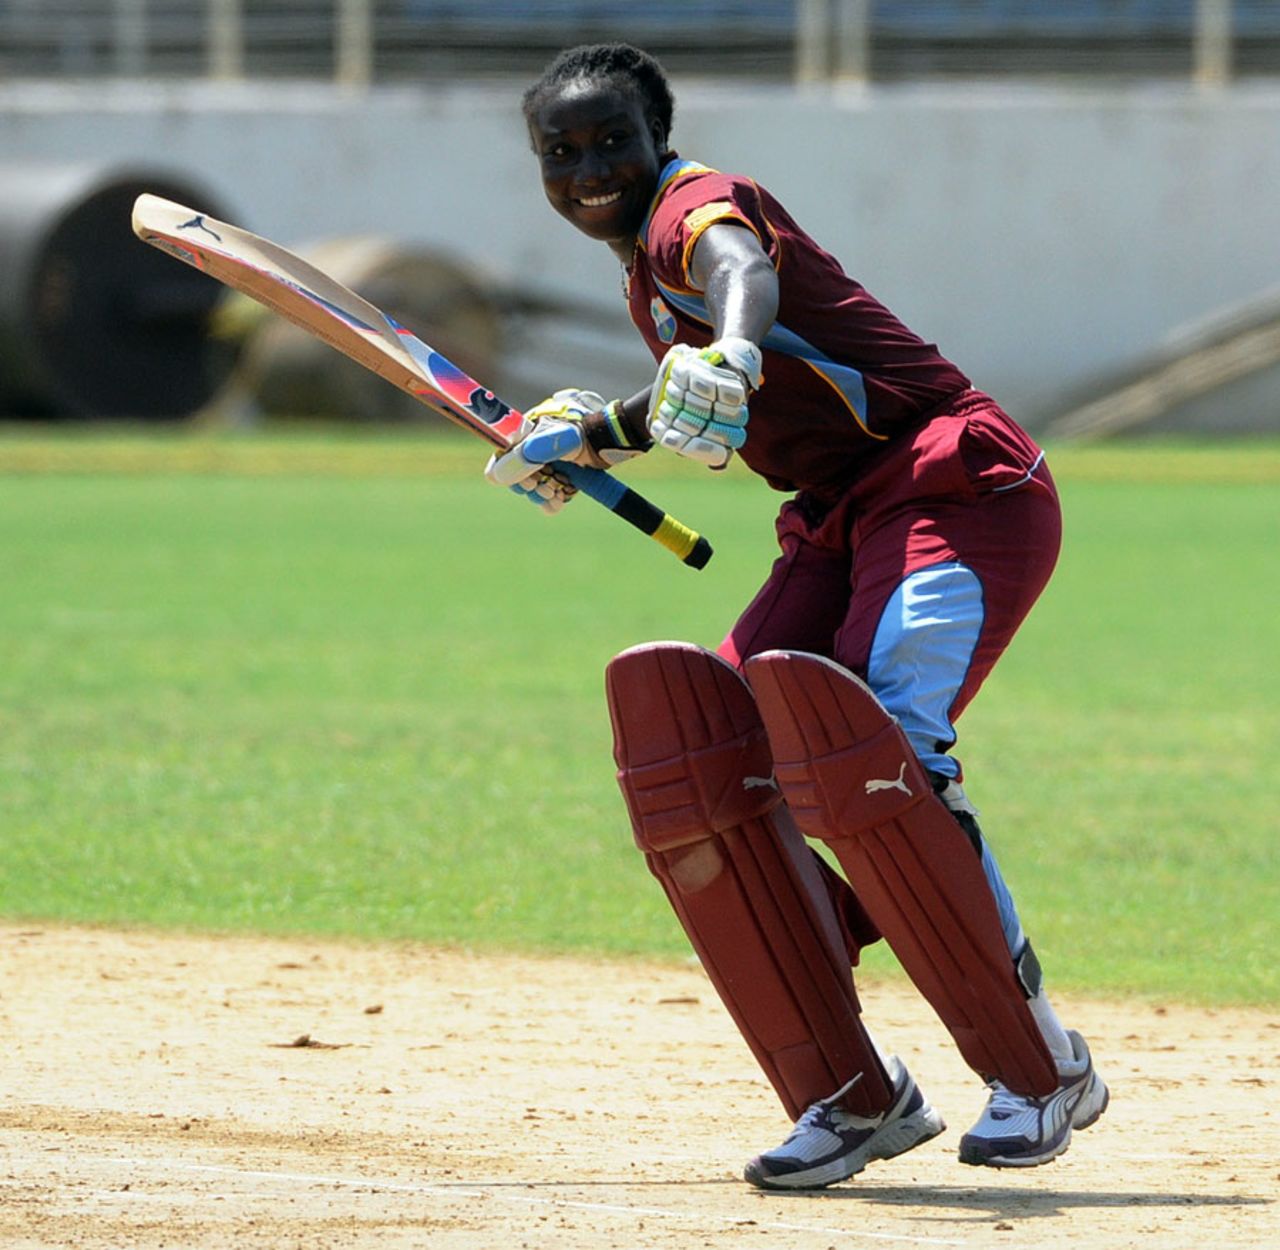 Taylor scored her fifth ODI century and finished unbeaten on 135 off 148 balls, West Indies v New Zealand, 3rd Women's ODI, Kingston, October 10, 2013